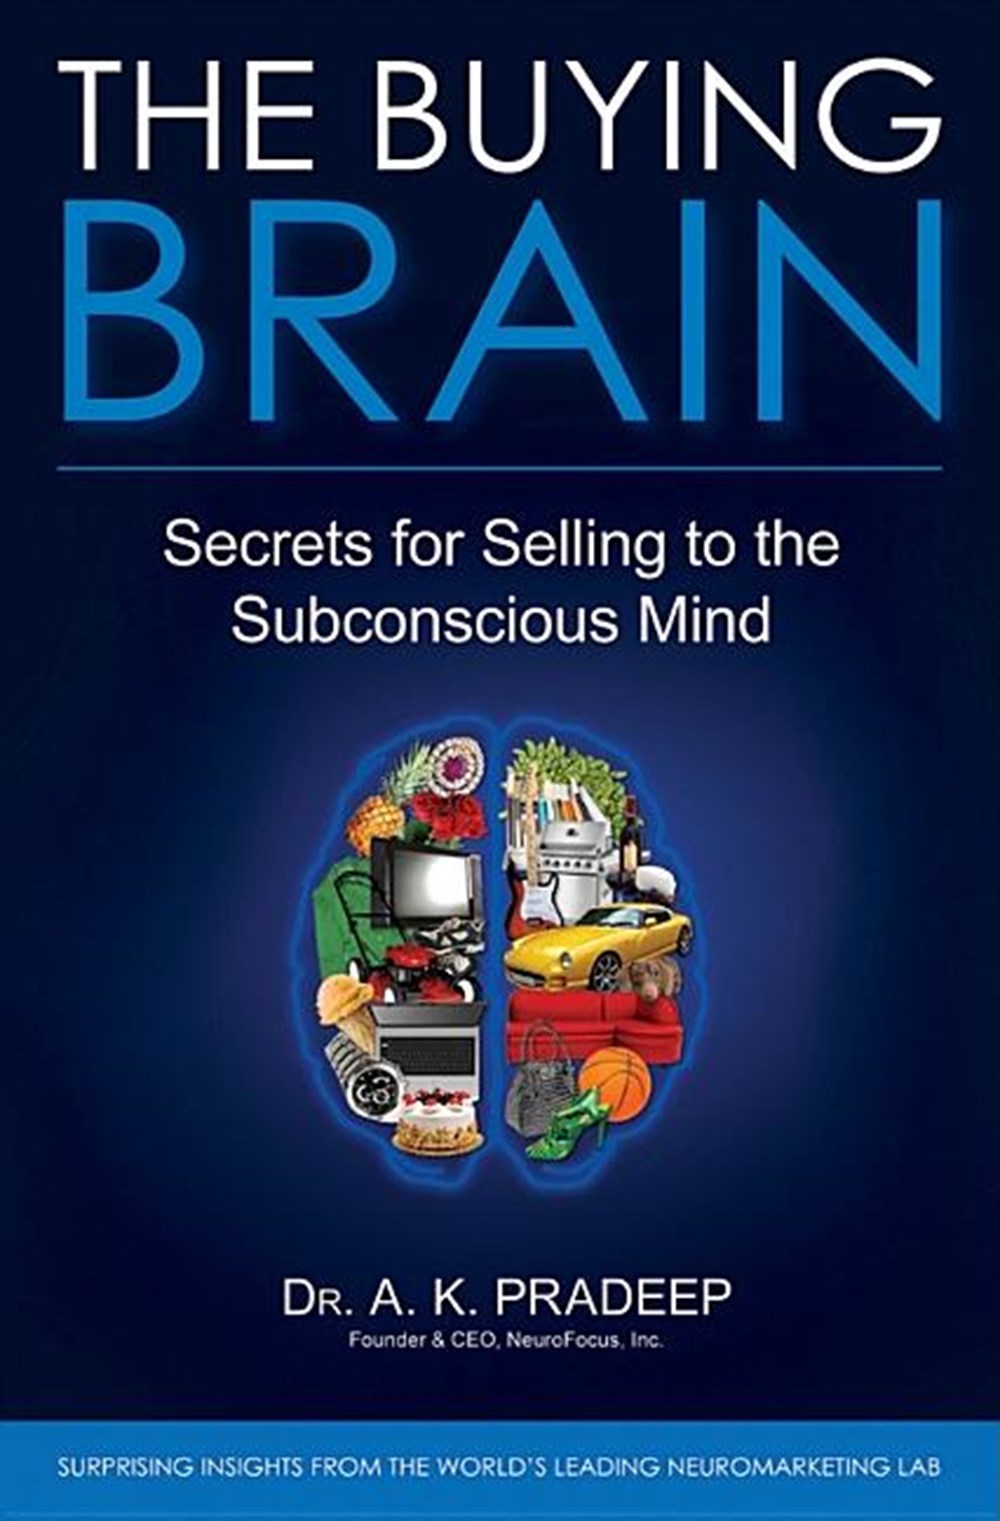 Buying Brain Secrets for Selling to the Subconscious Mind